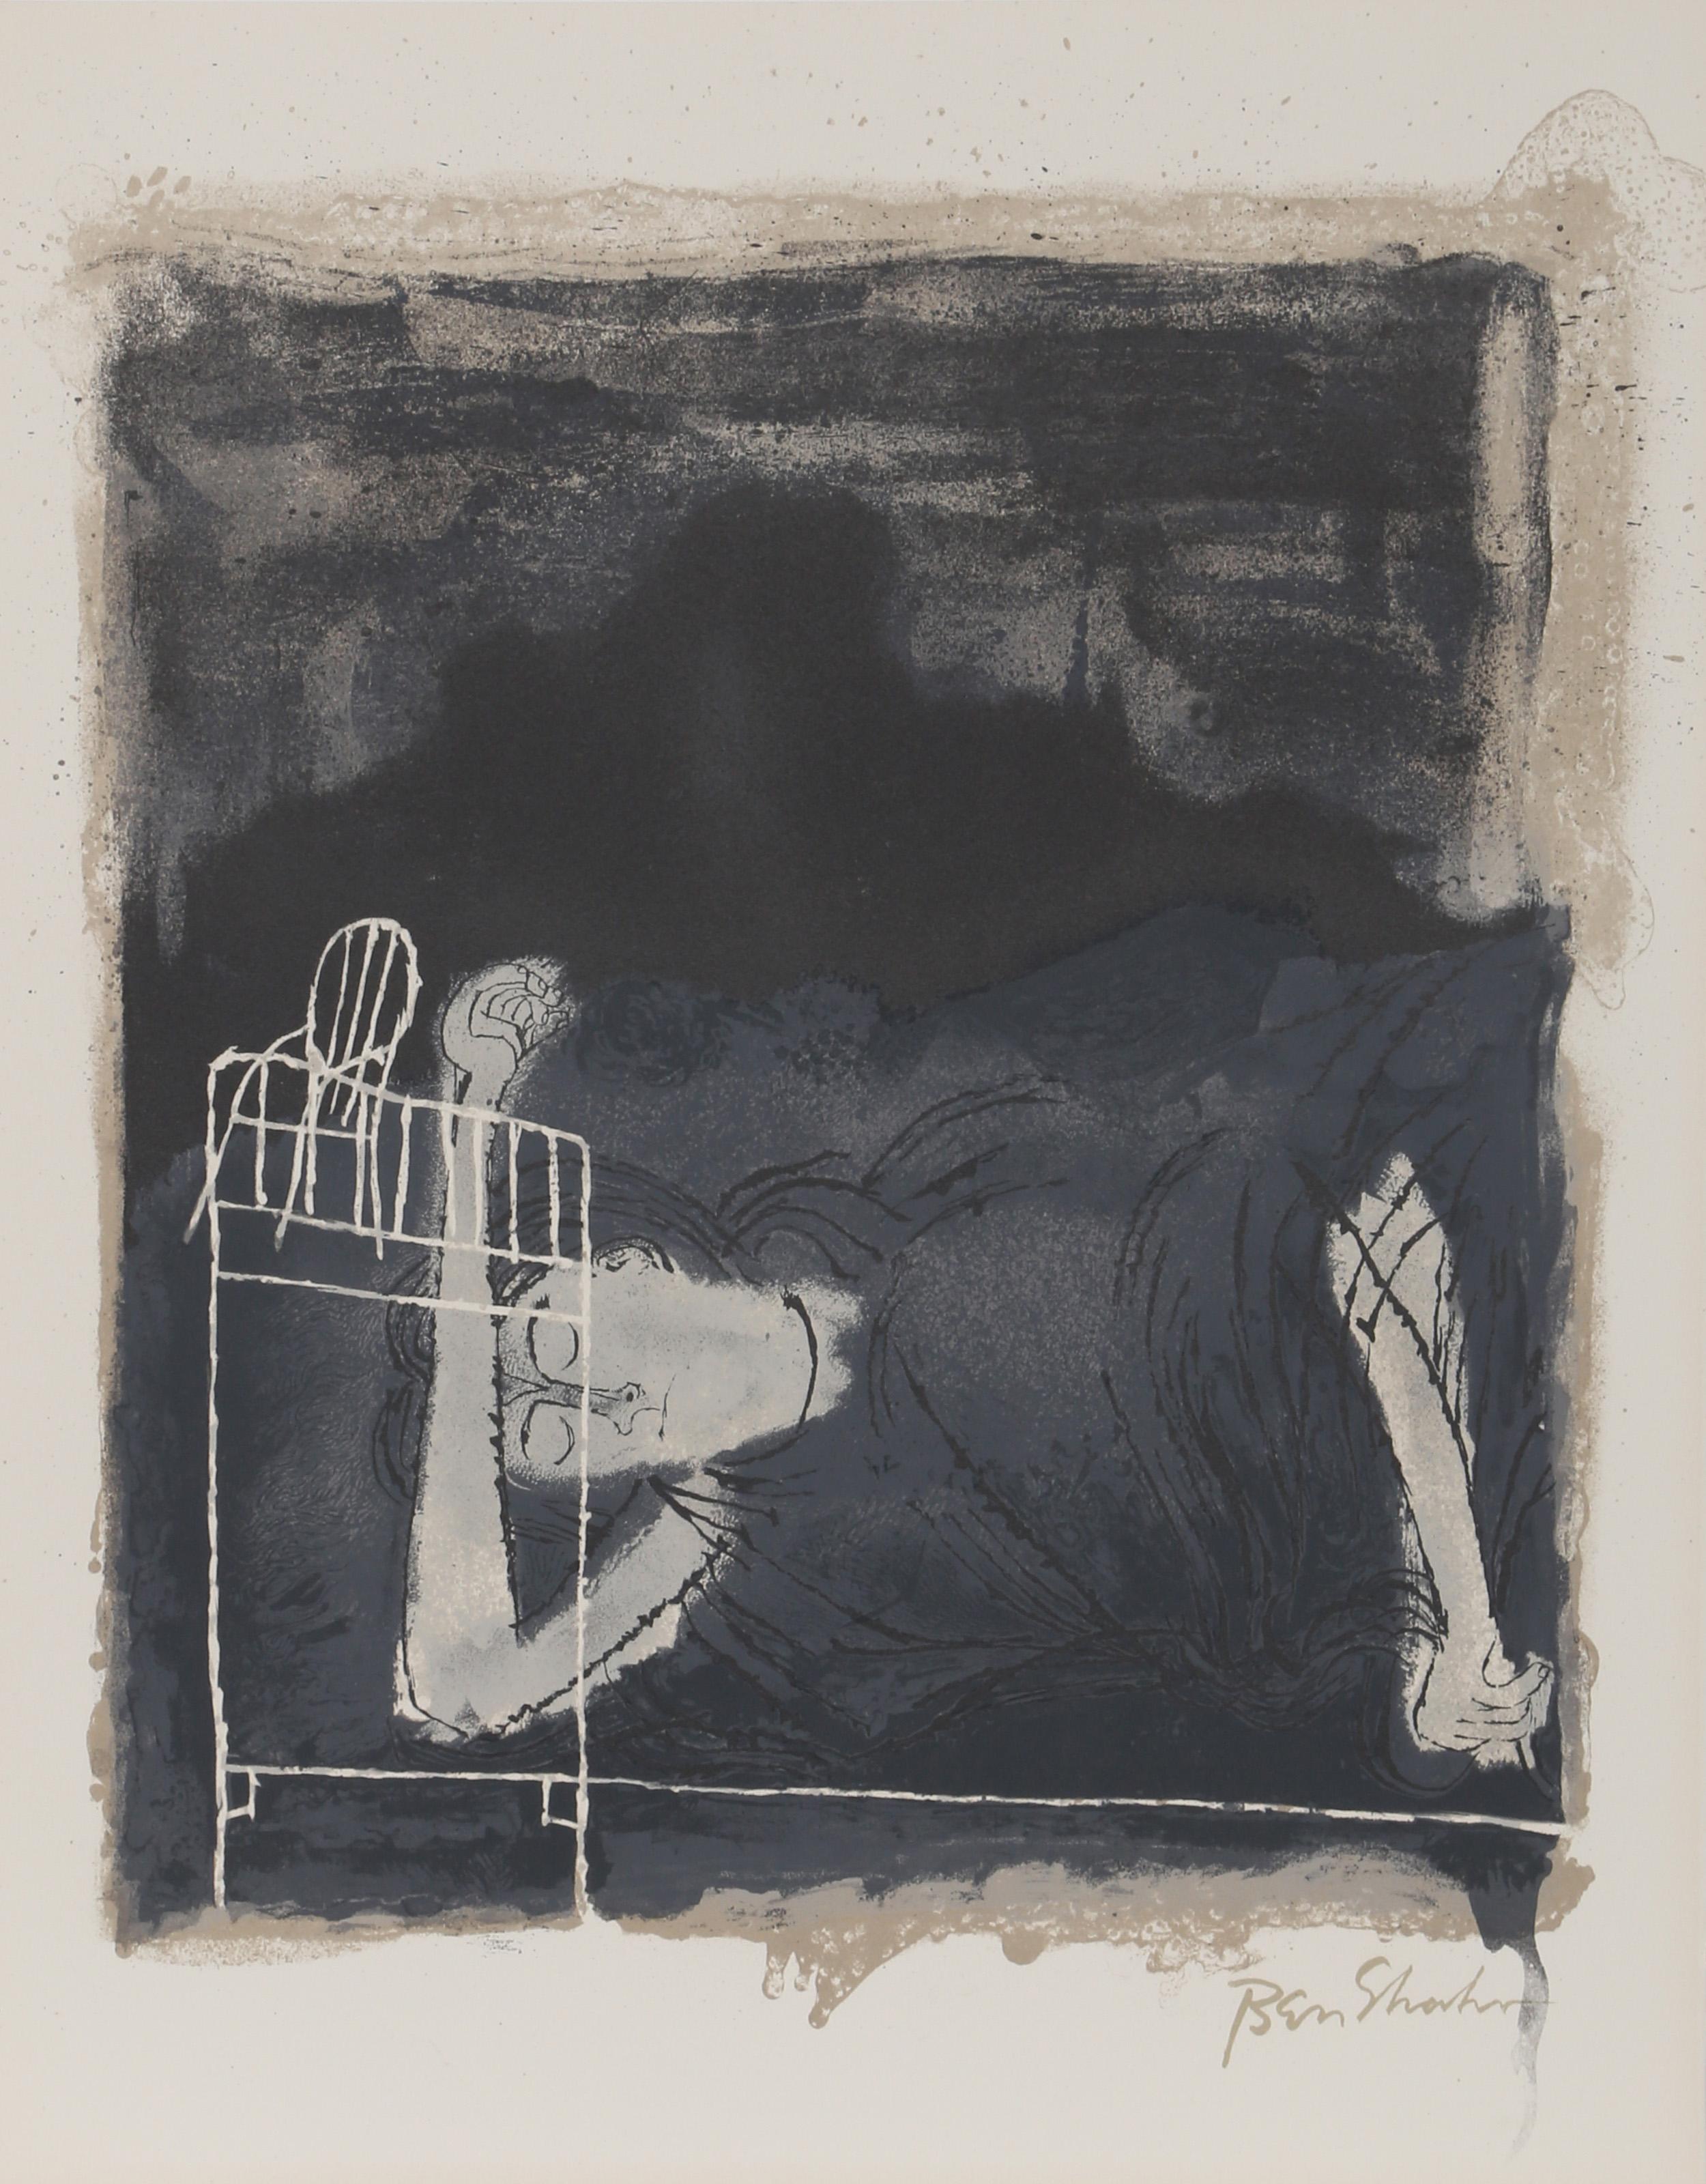 Artist: Ben Shahn, American (1898 - 1969)
Title: Screams of Women in Labor from the Rilke Portfolio
Year: 1968
Medium: Lithograph on Arches, signed in the plate
Edition: 750
Size: 22.5 x 17.75 in. (57.15 x 45.09 cm)

Printer: Atelier Mourlot Ltd.,